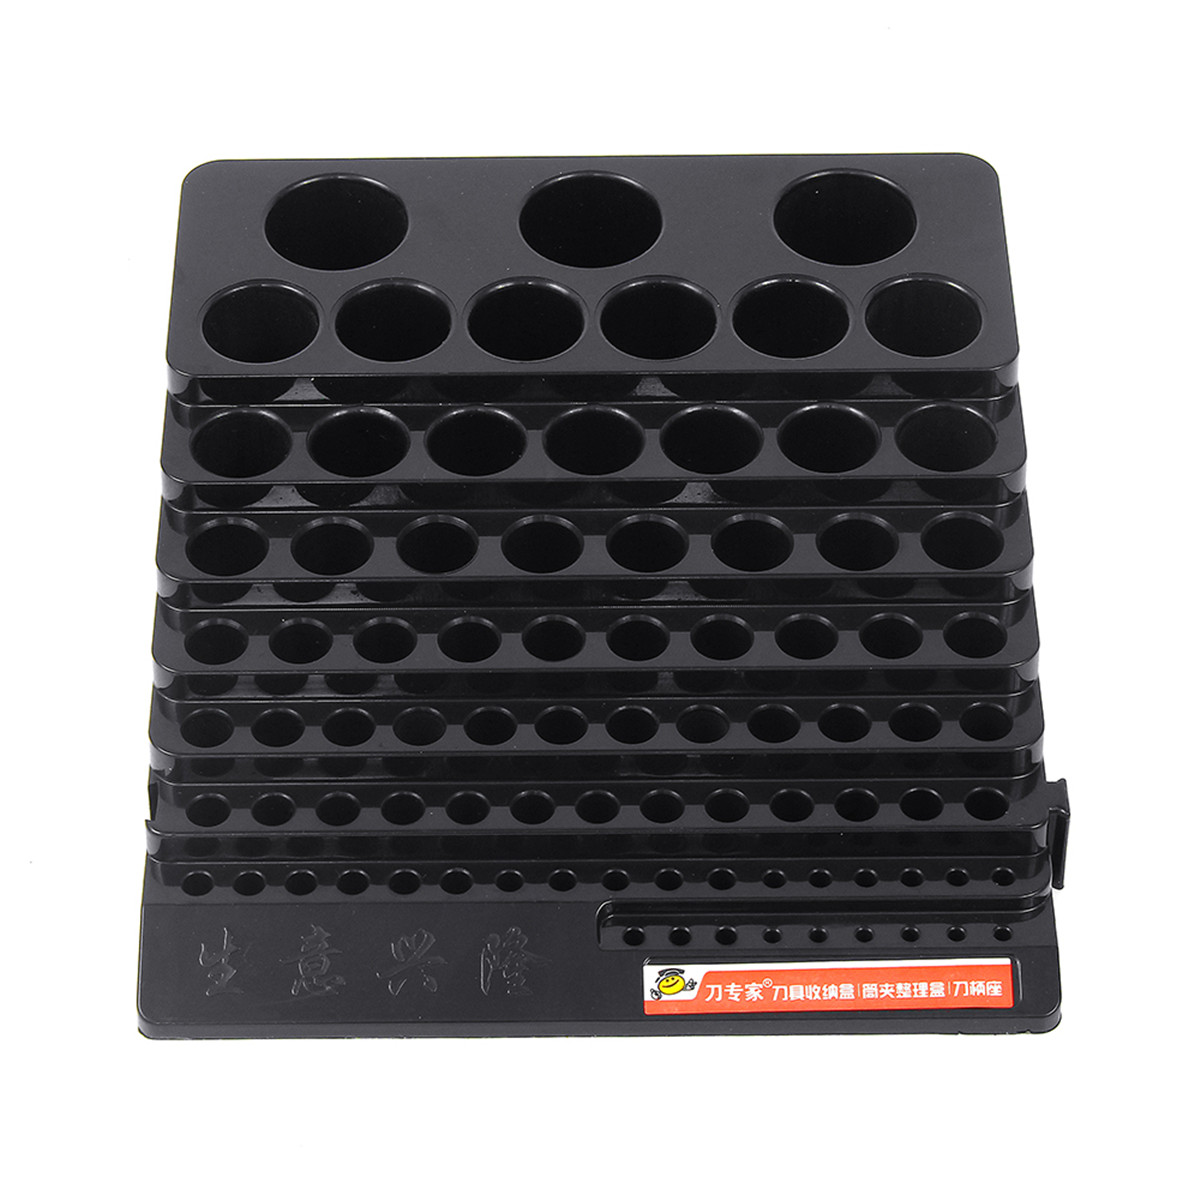 85-Holes-Drill-Bit-Storage-Box-Without-Drill-Milling-Cutter-Saving-Space-Holder-1630858-1